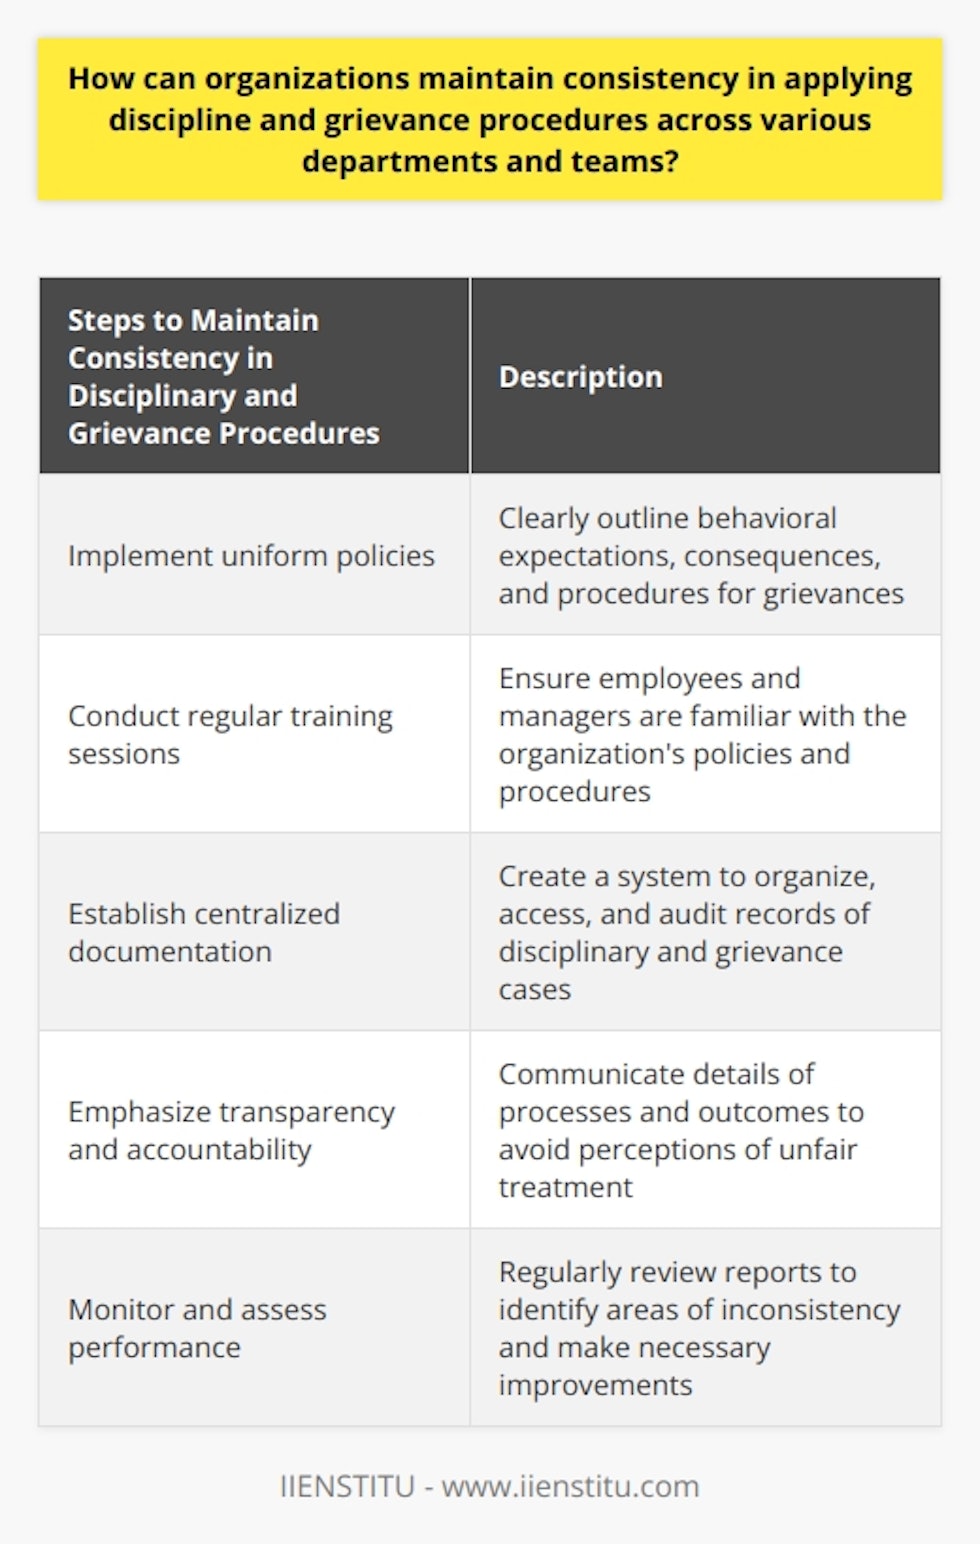 Maintaining consistency in applying discipline and grievance procedures across various departments and teams is vital for organizations to promote fairness, transparency, and trust within the workplace. Implementing uniform policies, conducting regular training sessions, establishing centralized documentation, emphasizing transparency and accountability, and monitoring and assessing performance are all essential steps in achieving this goal.Firstly, organizations must implement uniform policies that clearly outline behavioral expectations, consequences for violations, and processes for addressing grievances. These policies should be communicated to all employees and consistently enforced throughout the organization. By establishing a clear framework, employees understand what is expected of them and what consequences they may face if they violate the policies.Regular training sessions should be conducted to ensure that employees and managers are familiar with the organization's discipline and grievance procedures. These training sessions should provide a comprehensive overview of the policies and processes in place, reducing confusion and miscommunication. Employees should be empowered to take responsibility for their actions and practice self-regulation, knowing that consistent disciplinary actions will be taken.Organizations should establish a centralized system for documenting disciplinary and grievance cases. This ensures that records are organized, accessible, and easily auditable. By documenting disciplinary actions and outcomes in the same template across all departments, consistency is maintained, and leadership can analyze trends and make informed decisions on changes to the procedures.Transparency and accountability are crucial in maintaining consistency in discipline and grievance procedures. Organizations must communicate the details of these processes, as well as their adherence and performance, to employees. By sharing information on outcomes and consequences, organizations can avoid perceptions of unfair treatment and favoritism, ultimately strengthening employee trust in the system.Regular performance assessments of disciplinary and grievance procedures allow organizations to identify areas of inconsistency and formulate targeted solutions. By reviewing reports created from the centralized documentation process, leadership can ensure that their policies remain effective and are applied consistently. This assessment process also helps confirm that the policies align with evolving organizational goals and legal requirements.In conclusion, organizations can maintain consistency in applying discipline and grievance procedures across various departments and teams by implementing uniform policies, conducting regular training sessions, establishing centralized documentation, emphasizing transparency and accountability, and monitoring and assessing performance. These steps contribute to creating a fair, transparent, and conducive work environment that maintains employee trust and satisfaction.